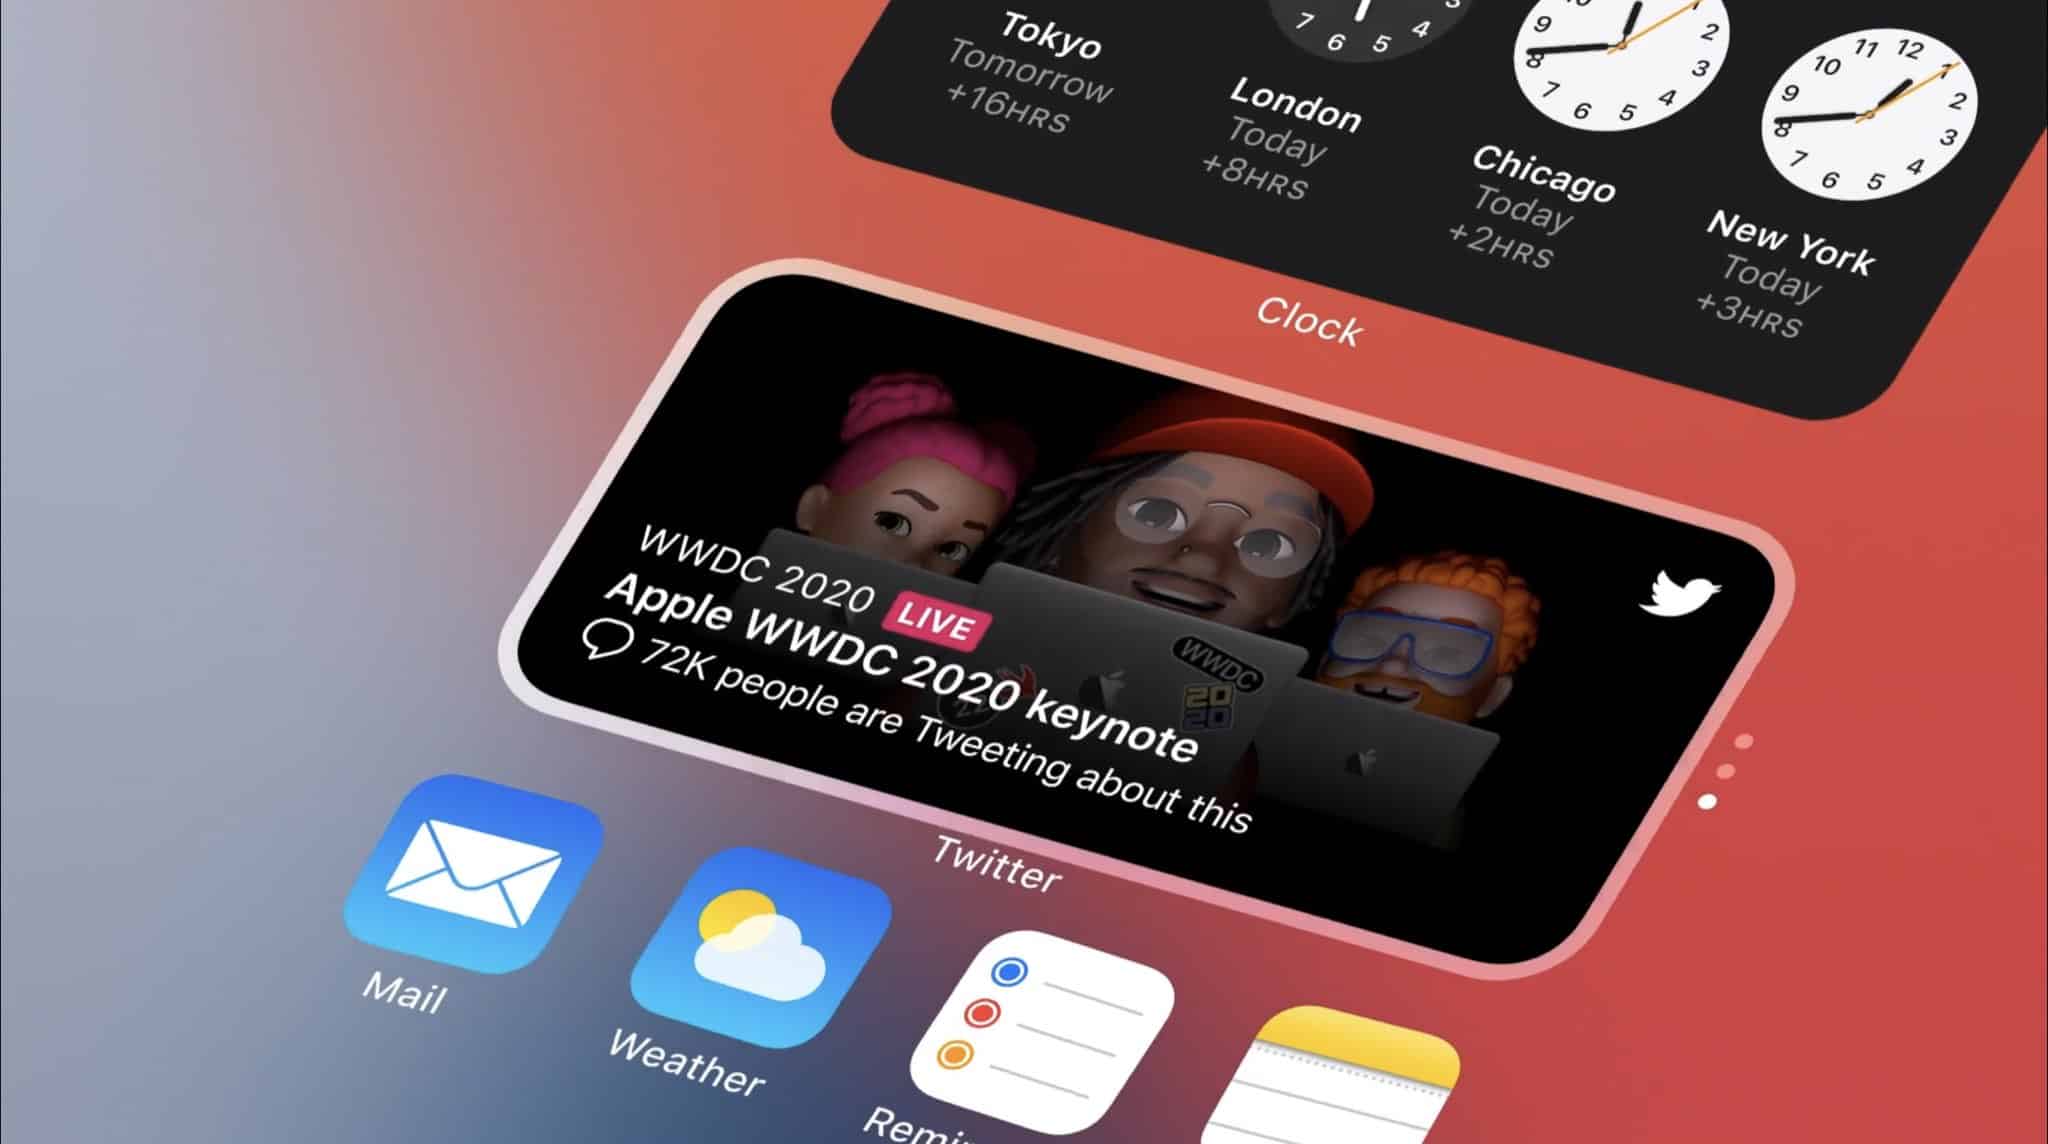 Apple iOS 14, iPadOS 14 and WatchOS 7 Detailed – Revamped Home Screen and More